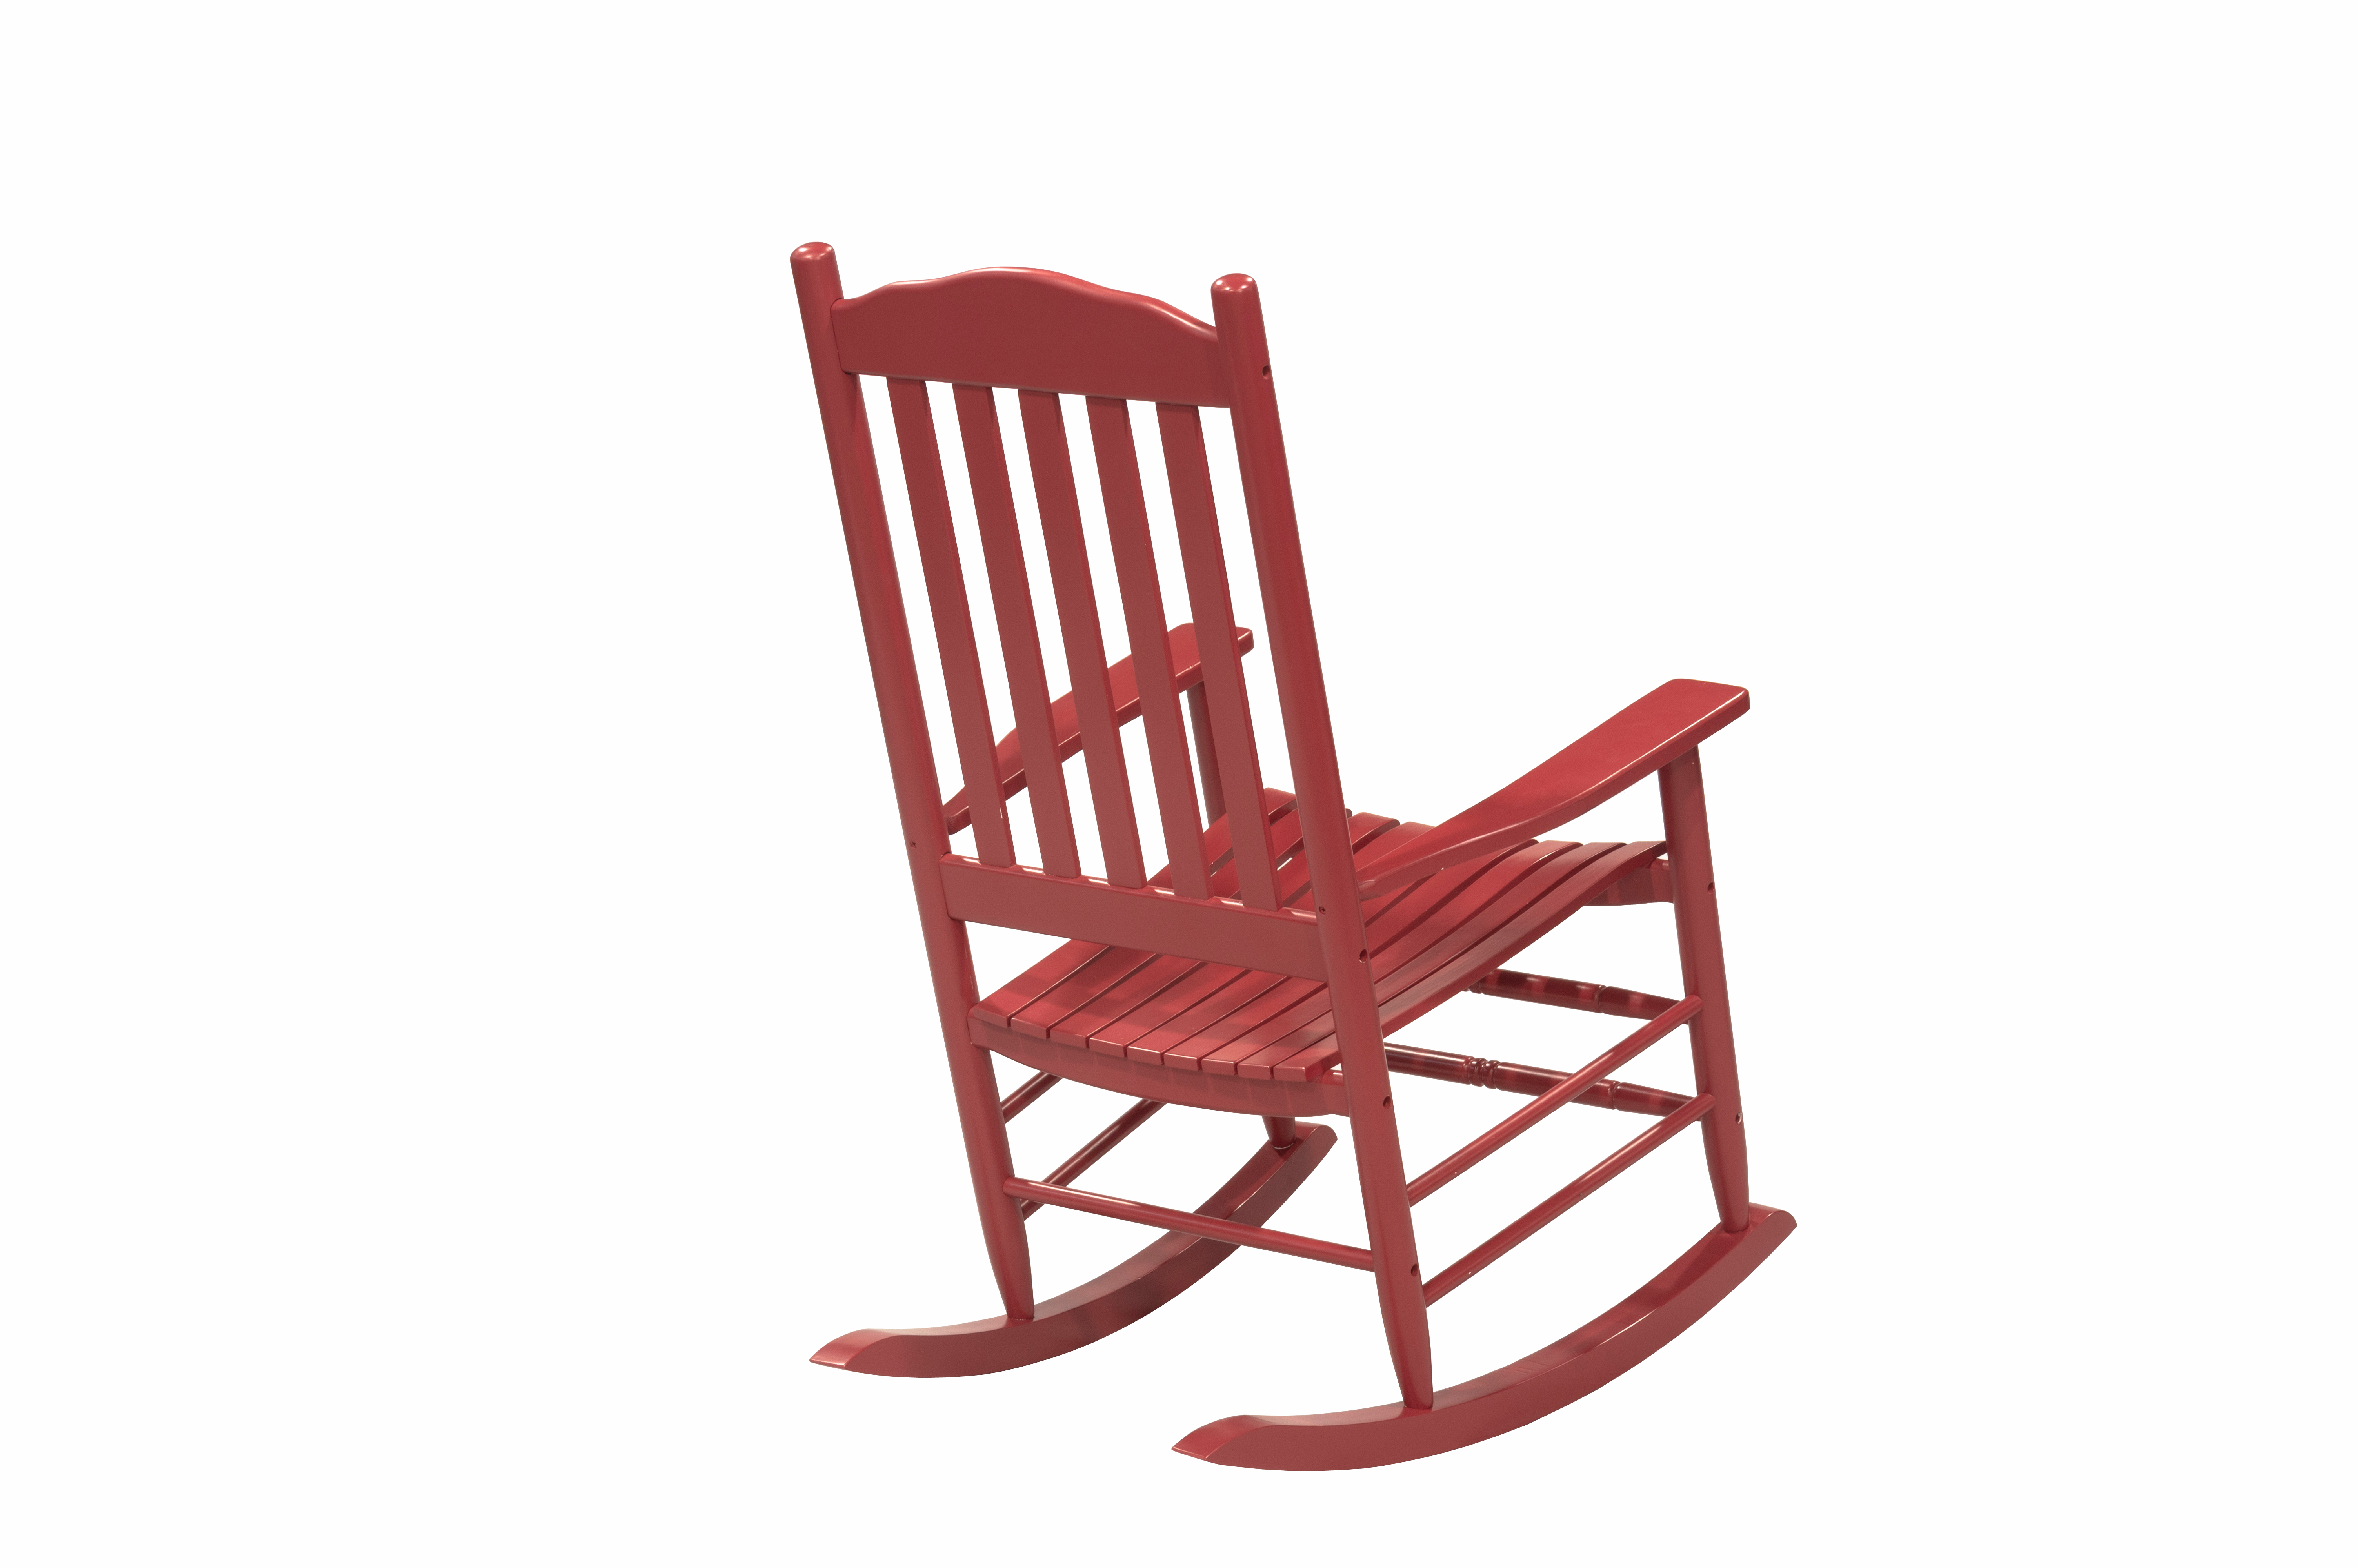 Outdoor Patio Garden Furniture 3-Piece Wood Porch Rocking Chair Set, Weather Resistant Finish,2 Rocking Chairs and 1 Side Table-Red - image 3 of 11